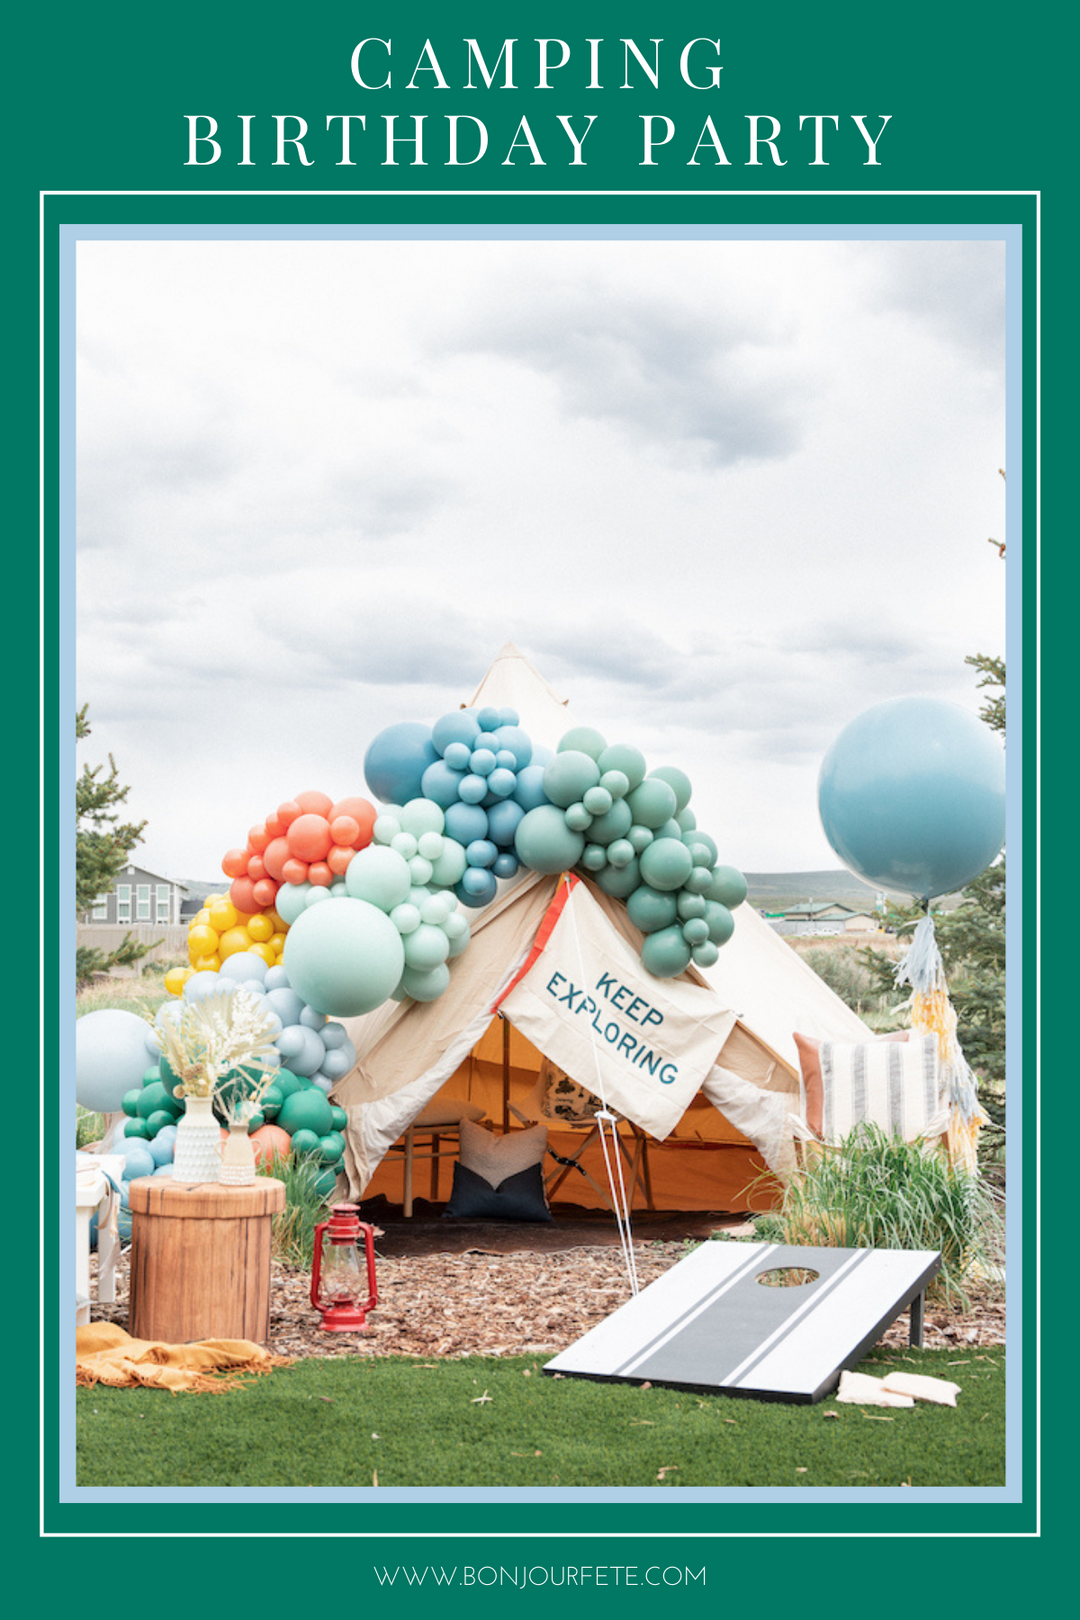 BEST CAMPING BIRTHDAY PARTY IDEAS AND DECORATIONS